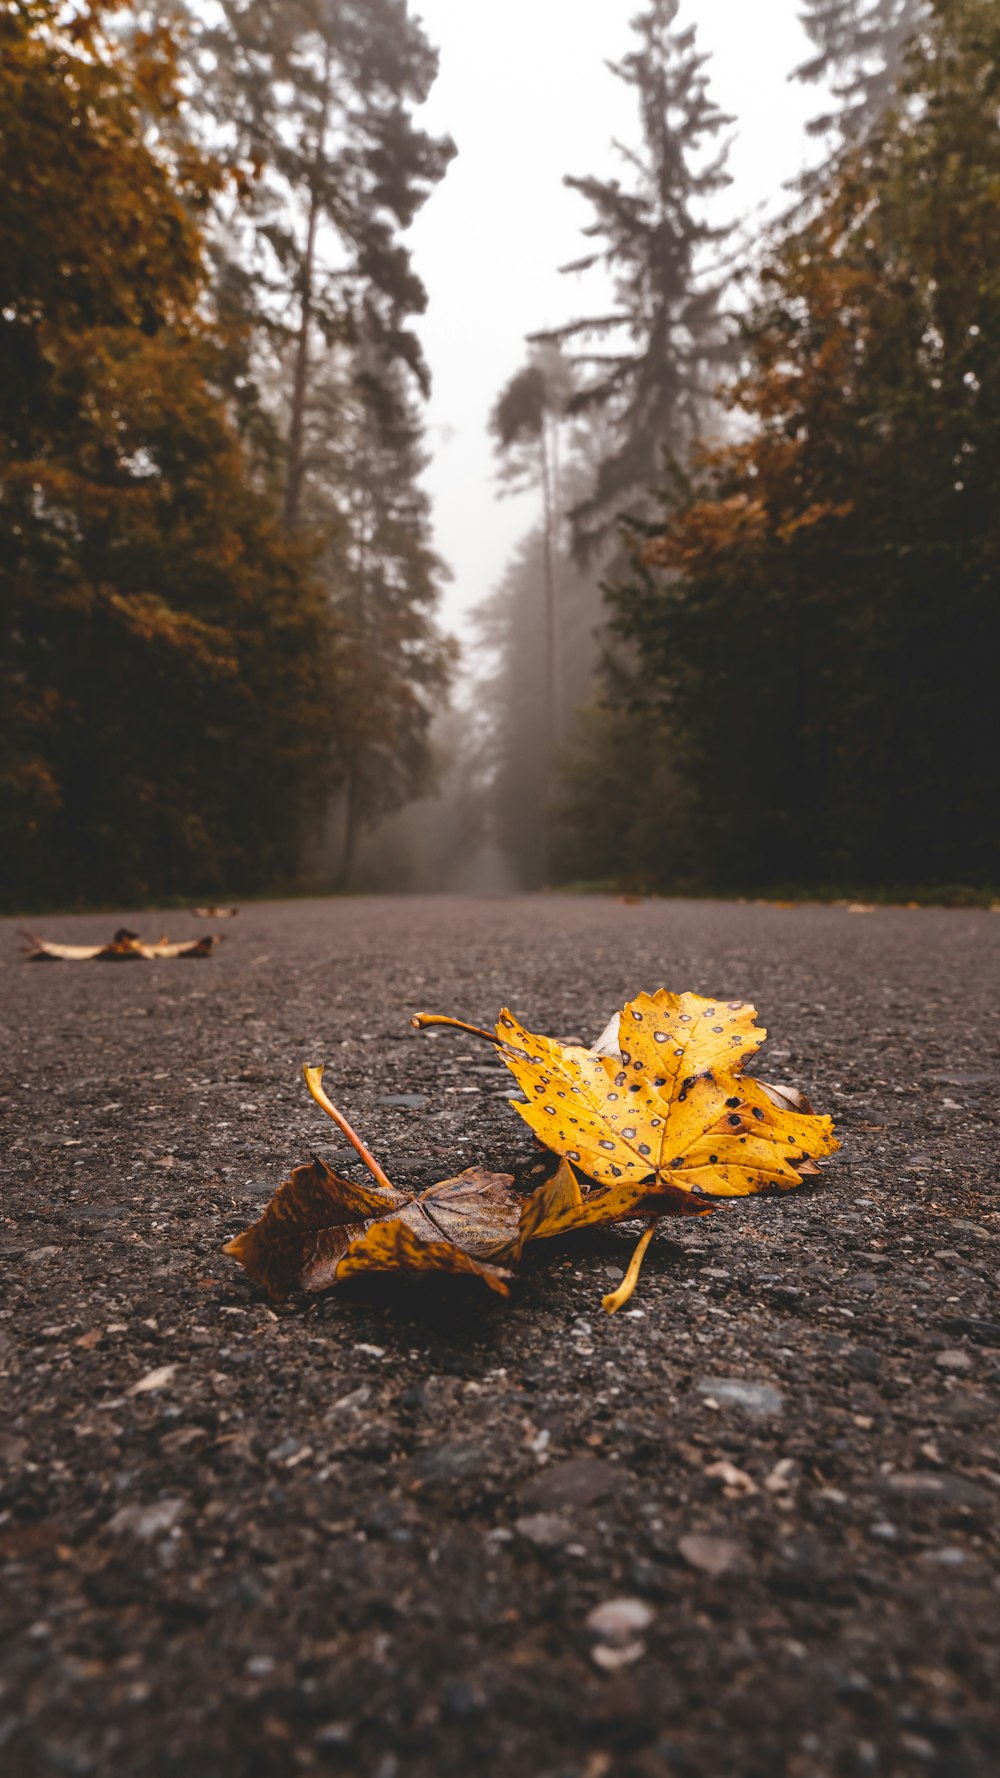 a leaf laying on the ground in the middle of the road